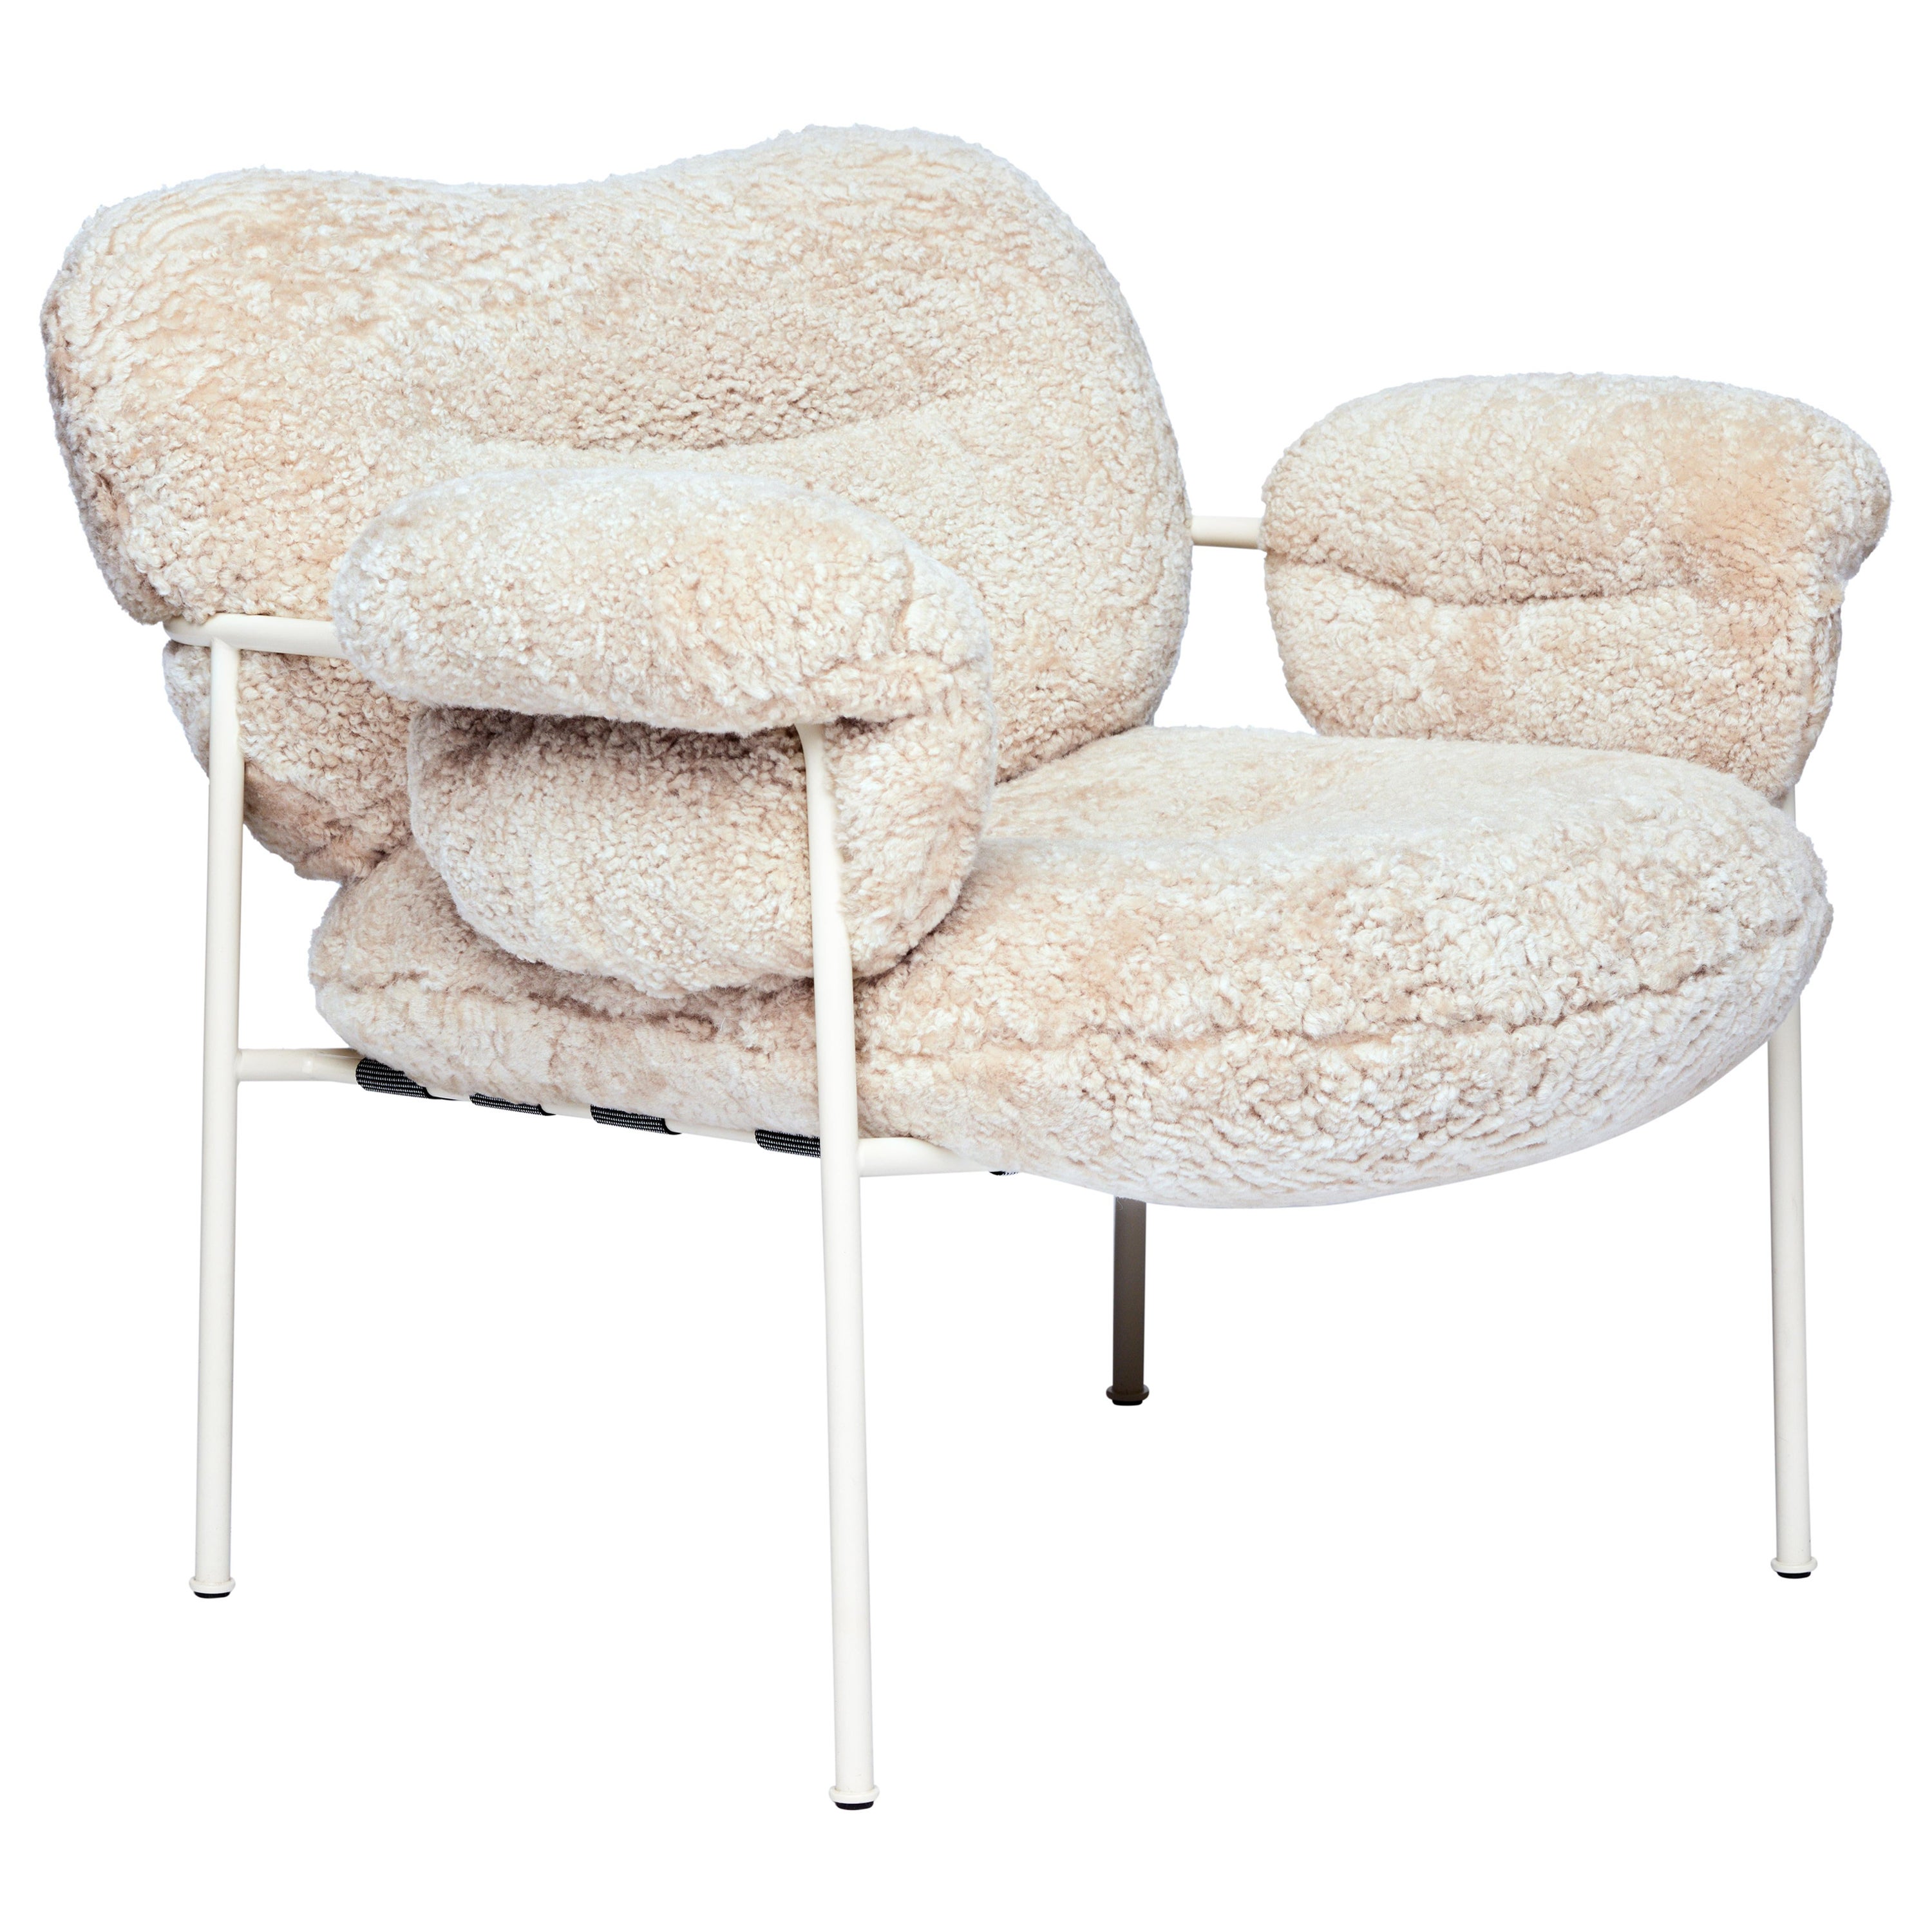 Bollo Armchair by Fogia, Mohawi Sheepskin, White Steel For Sale